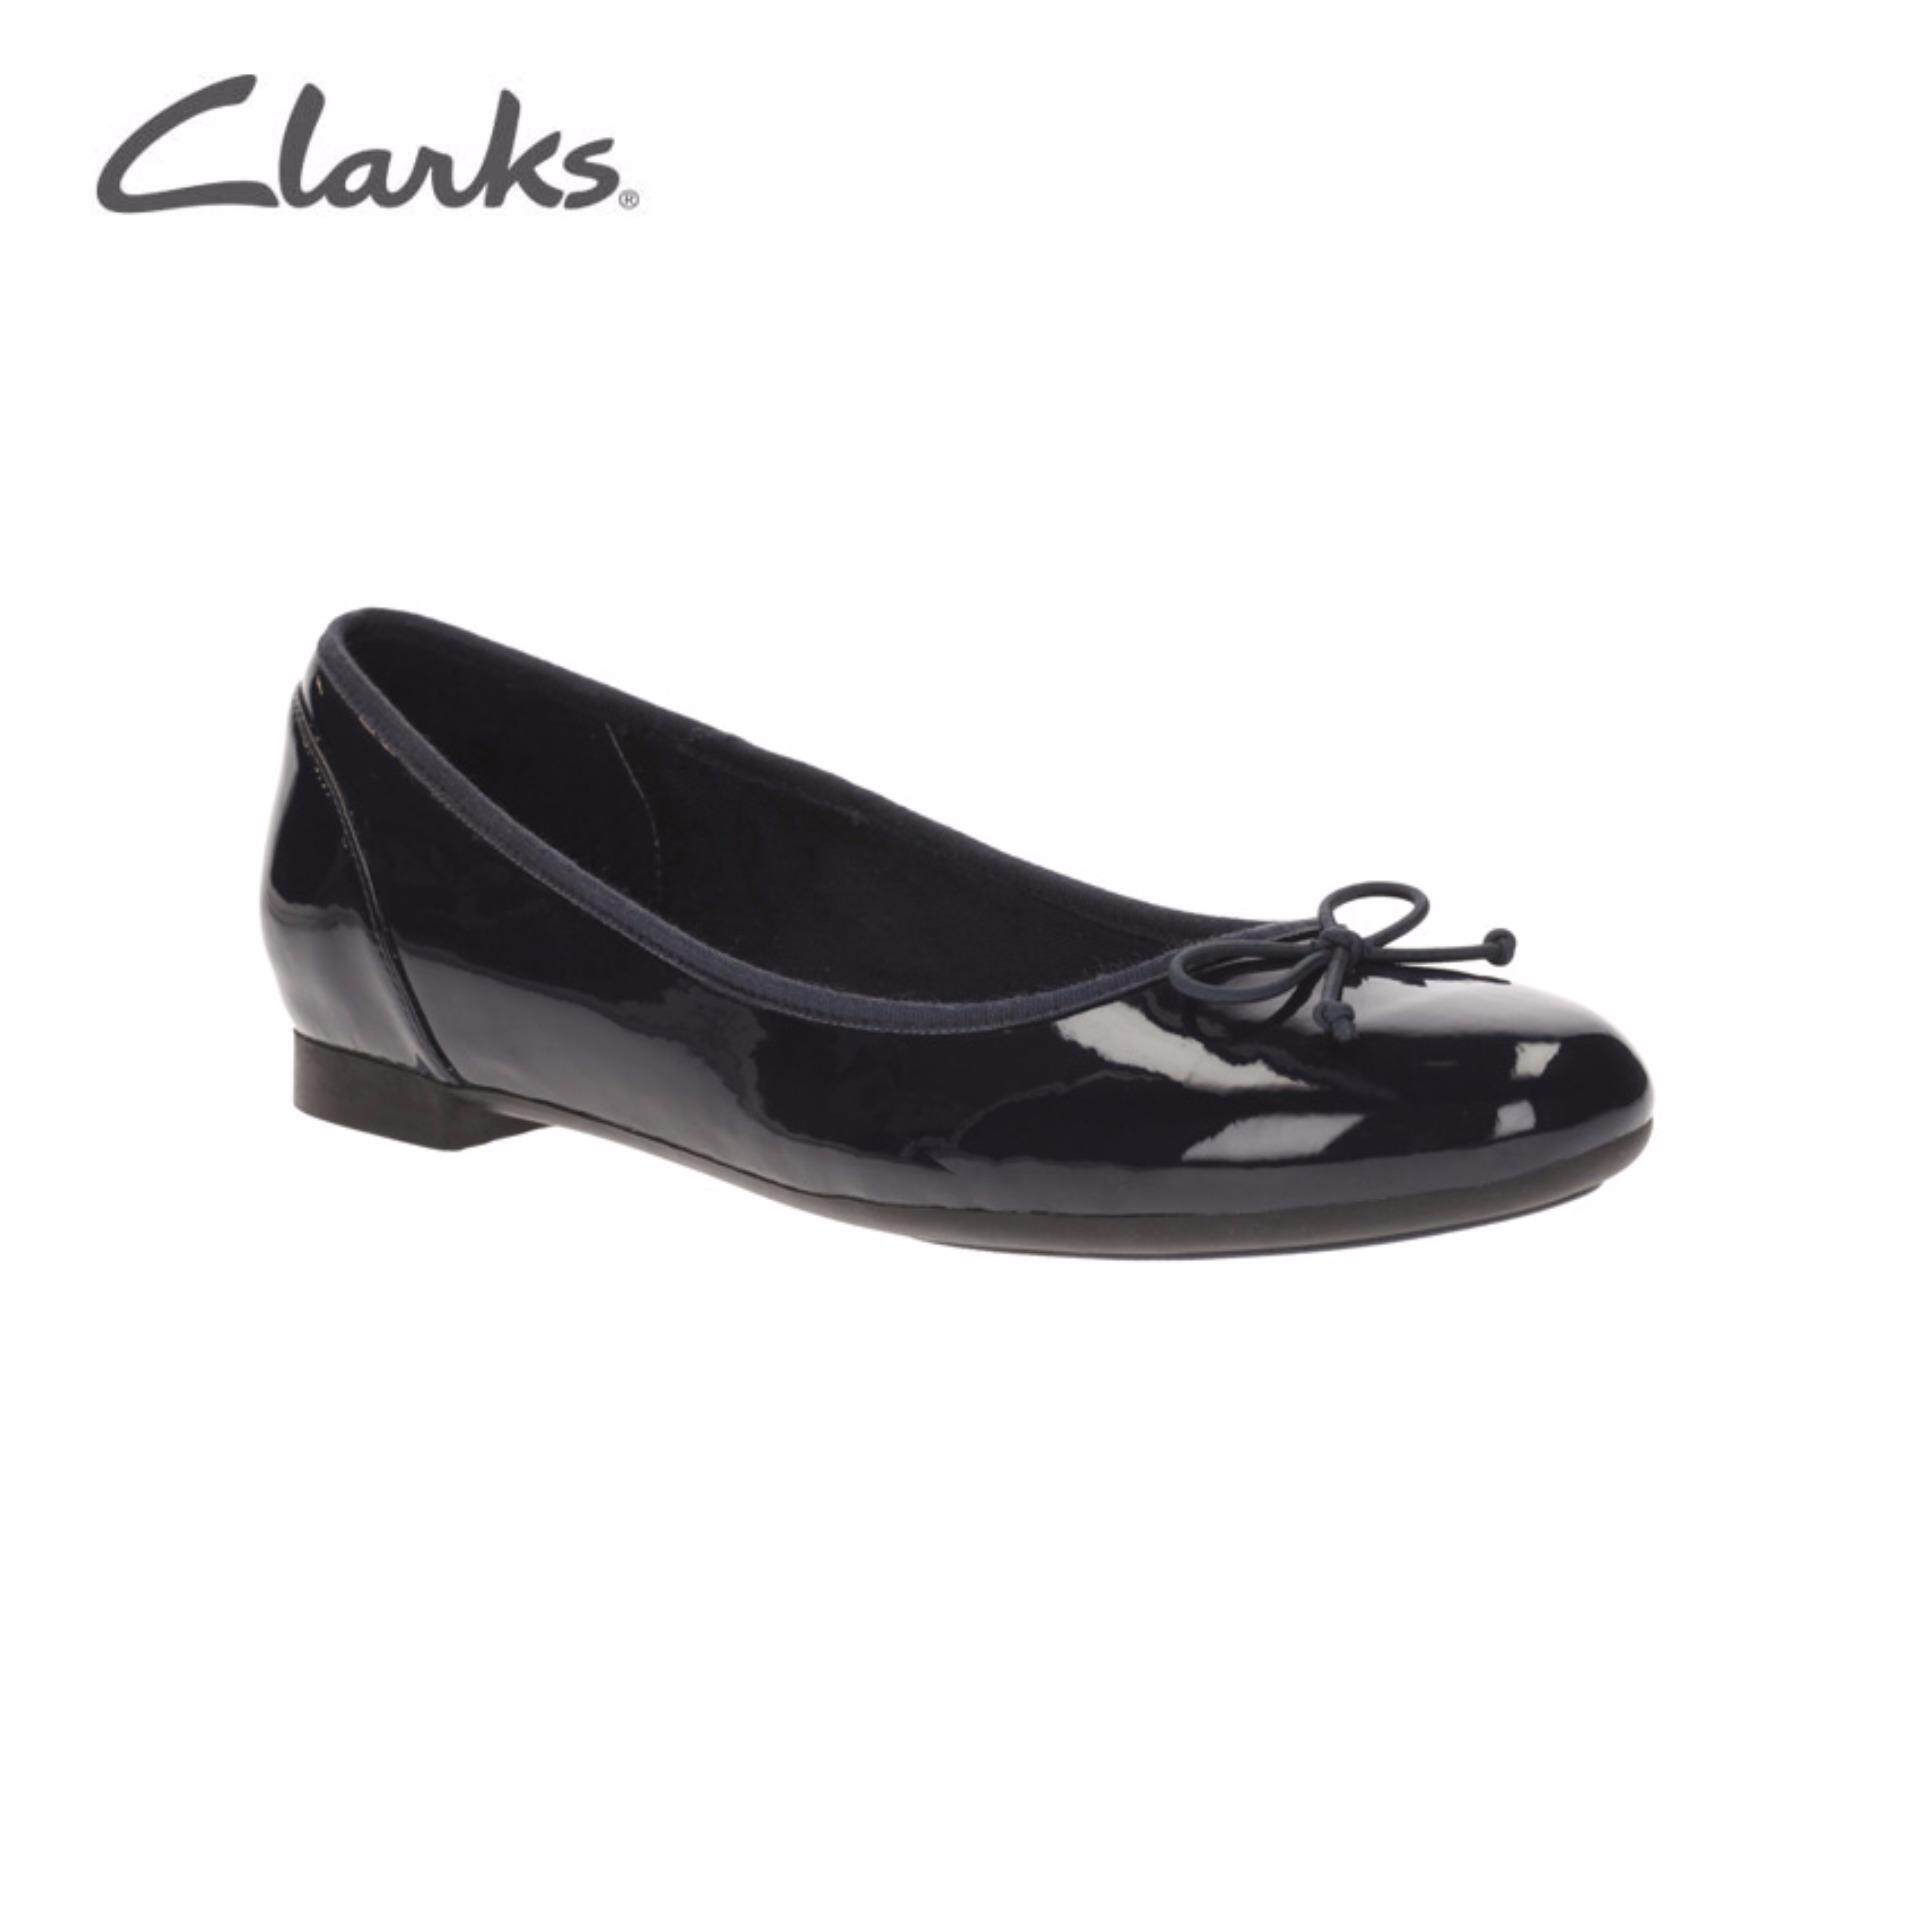 clarks womens navy flat shoes off 75 